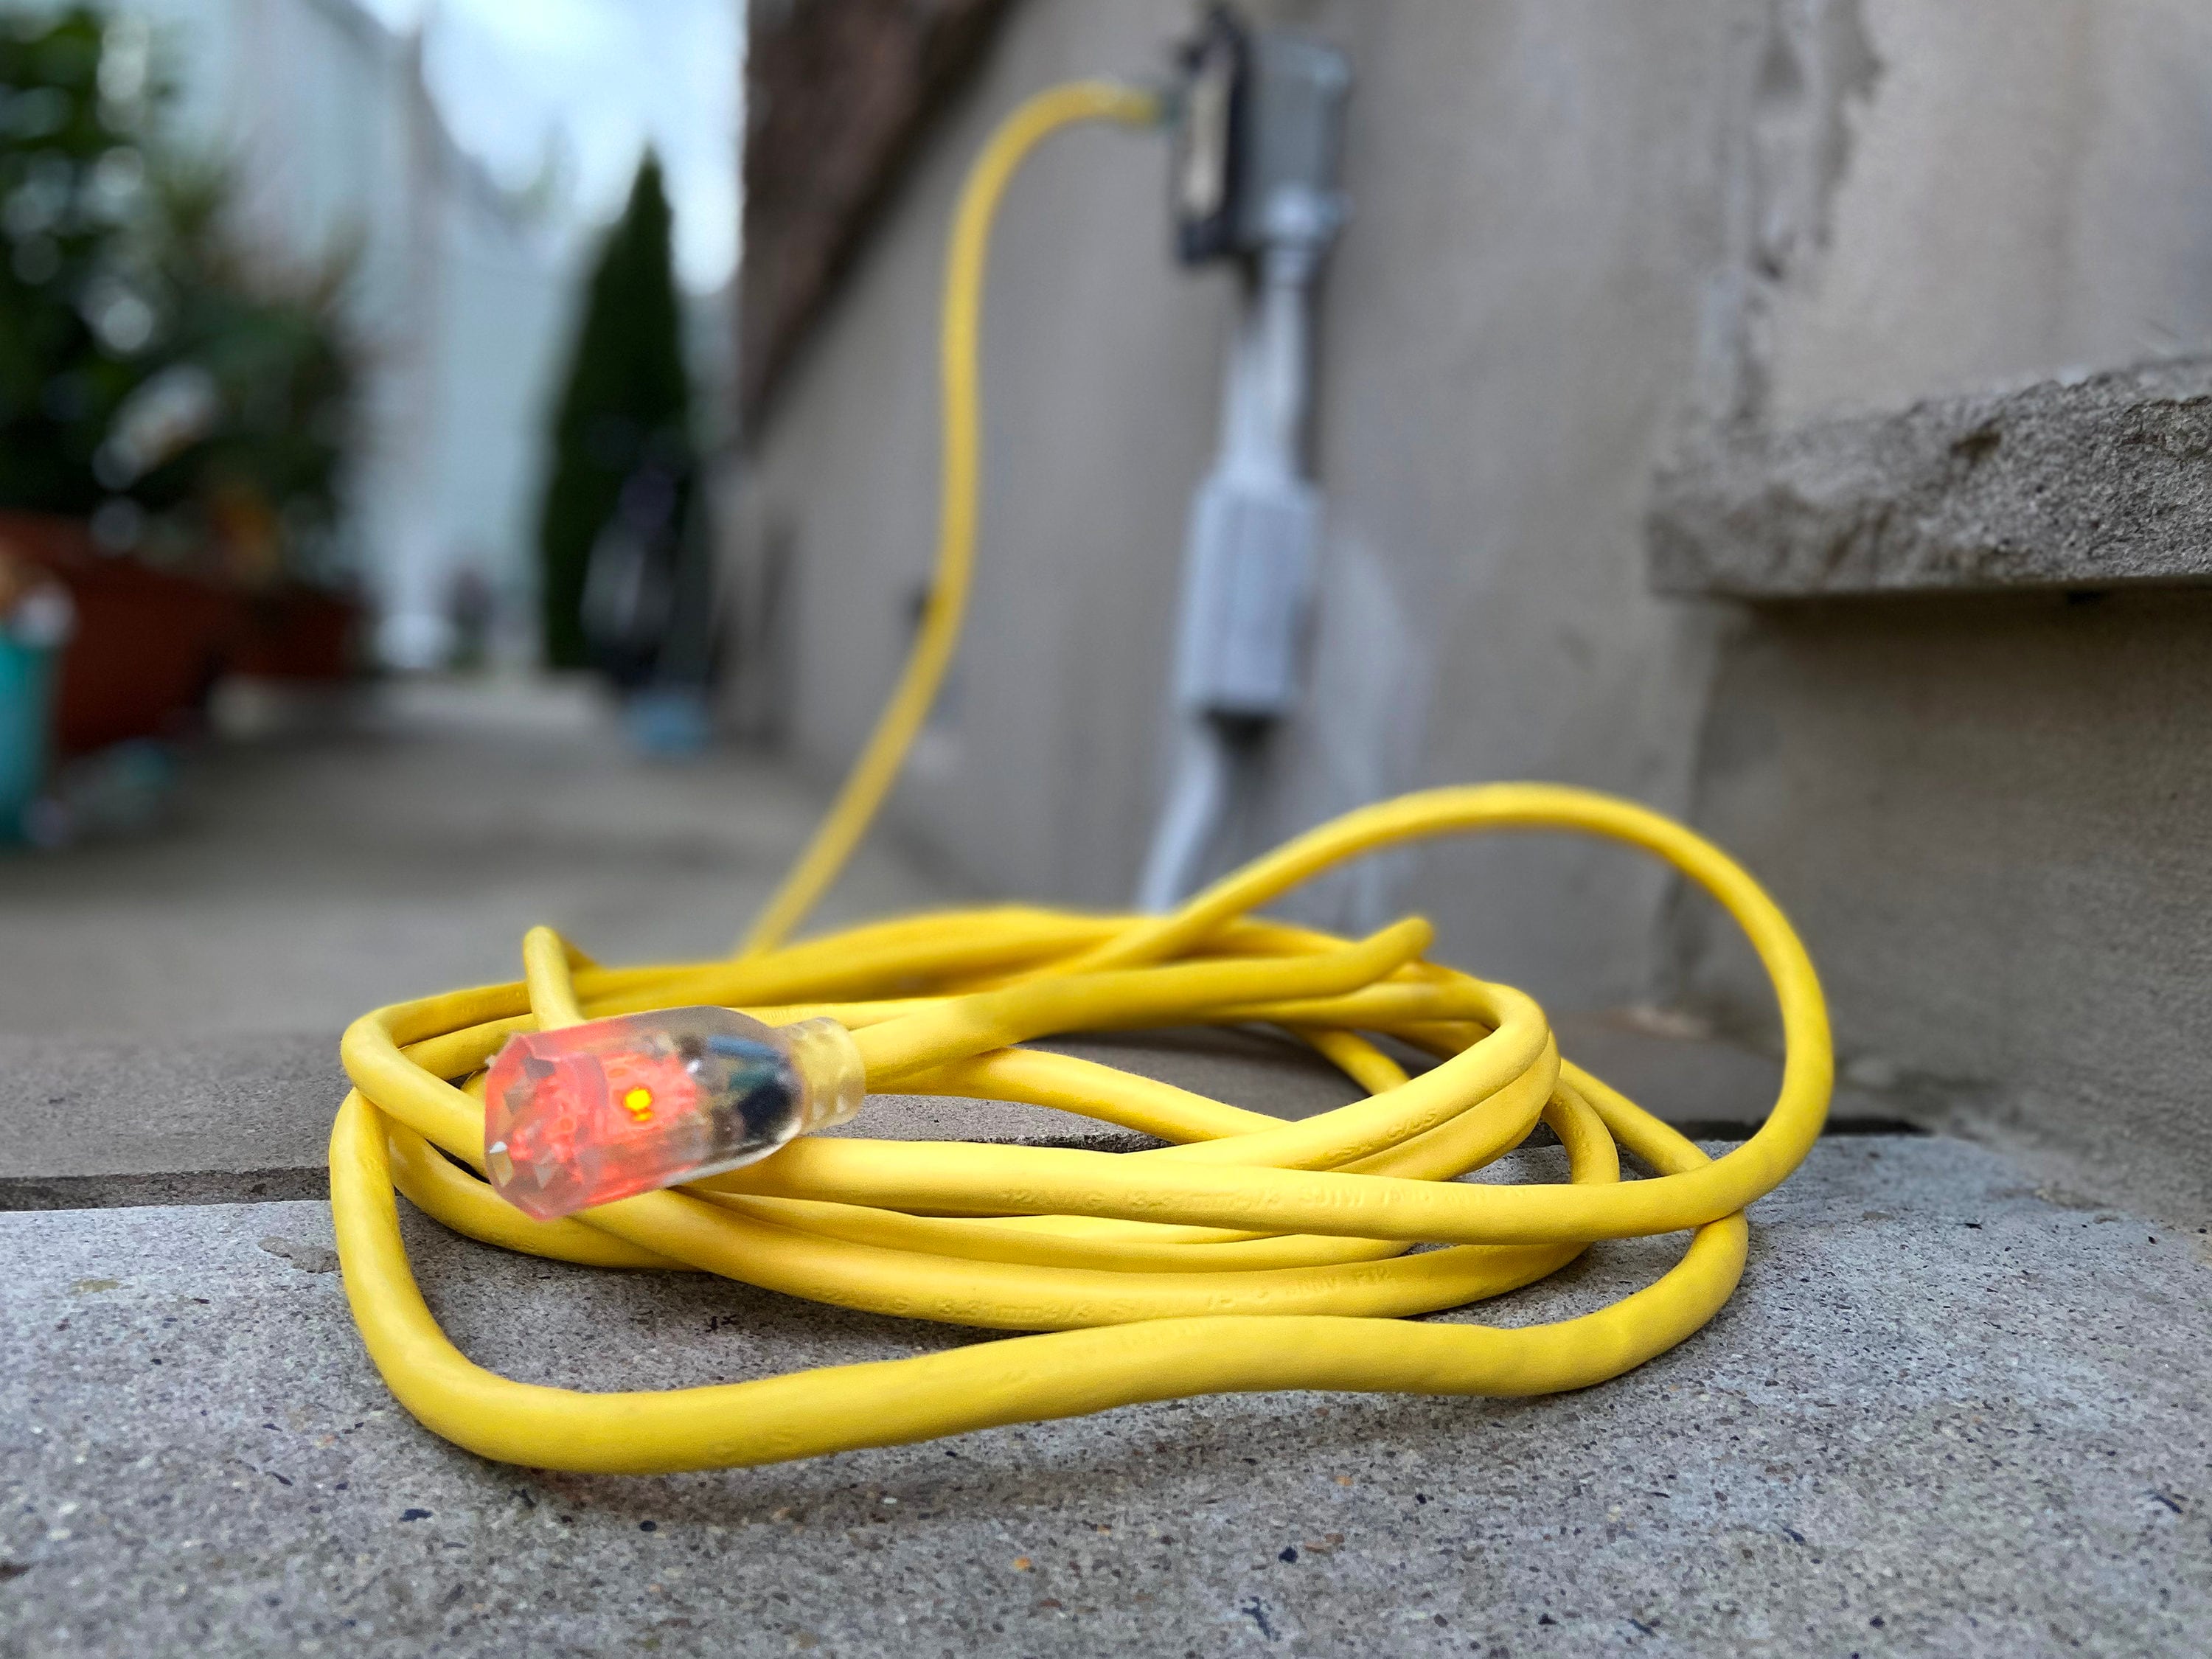 US Wire 74025 12/3 25-Foot SJTW Yellow Heavy Duty Lighted Plug Extension Cord